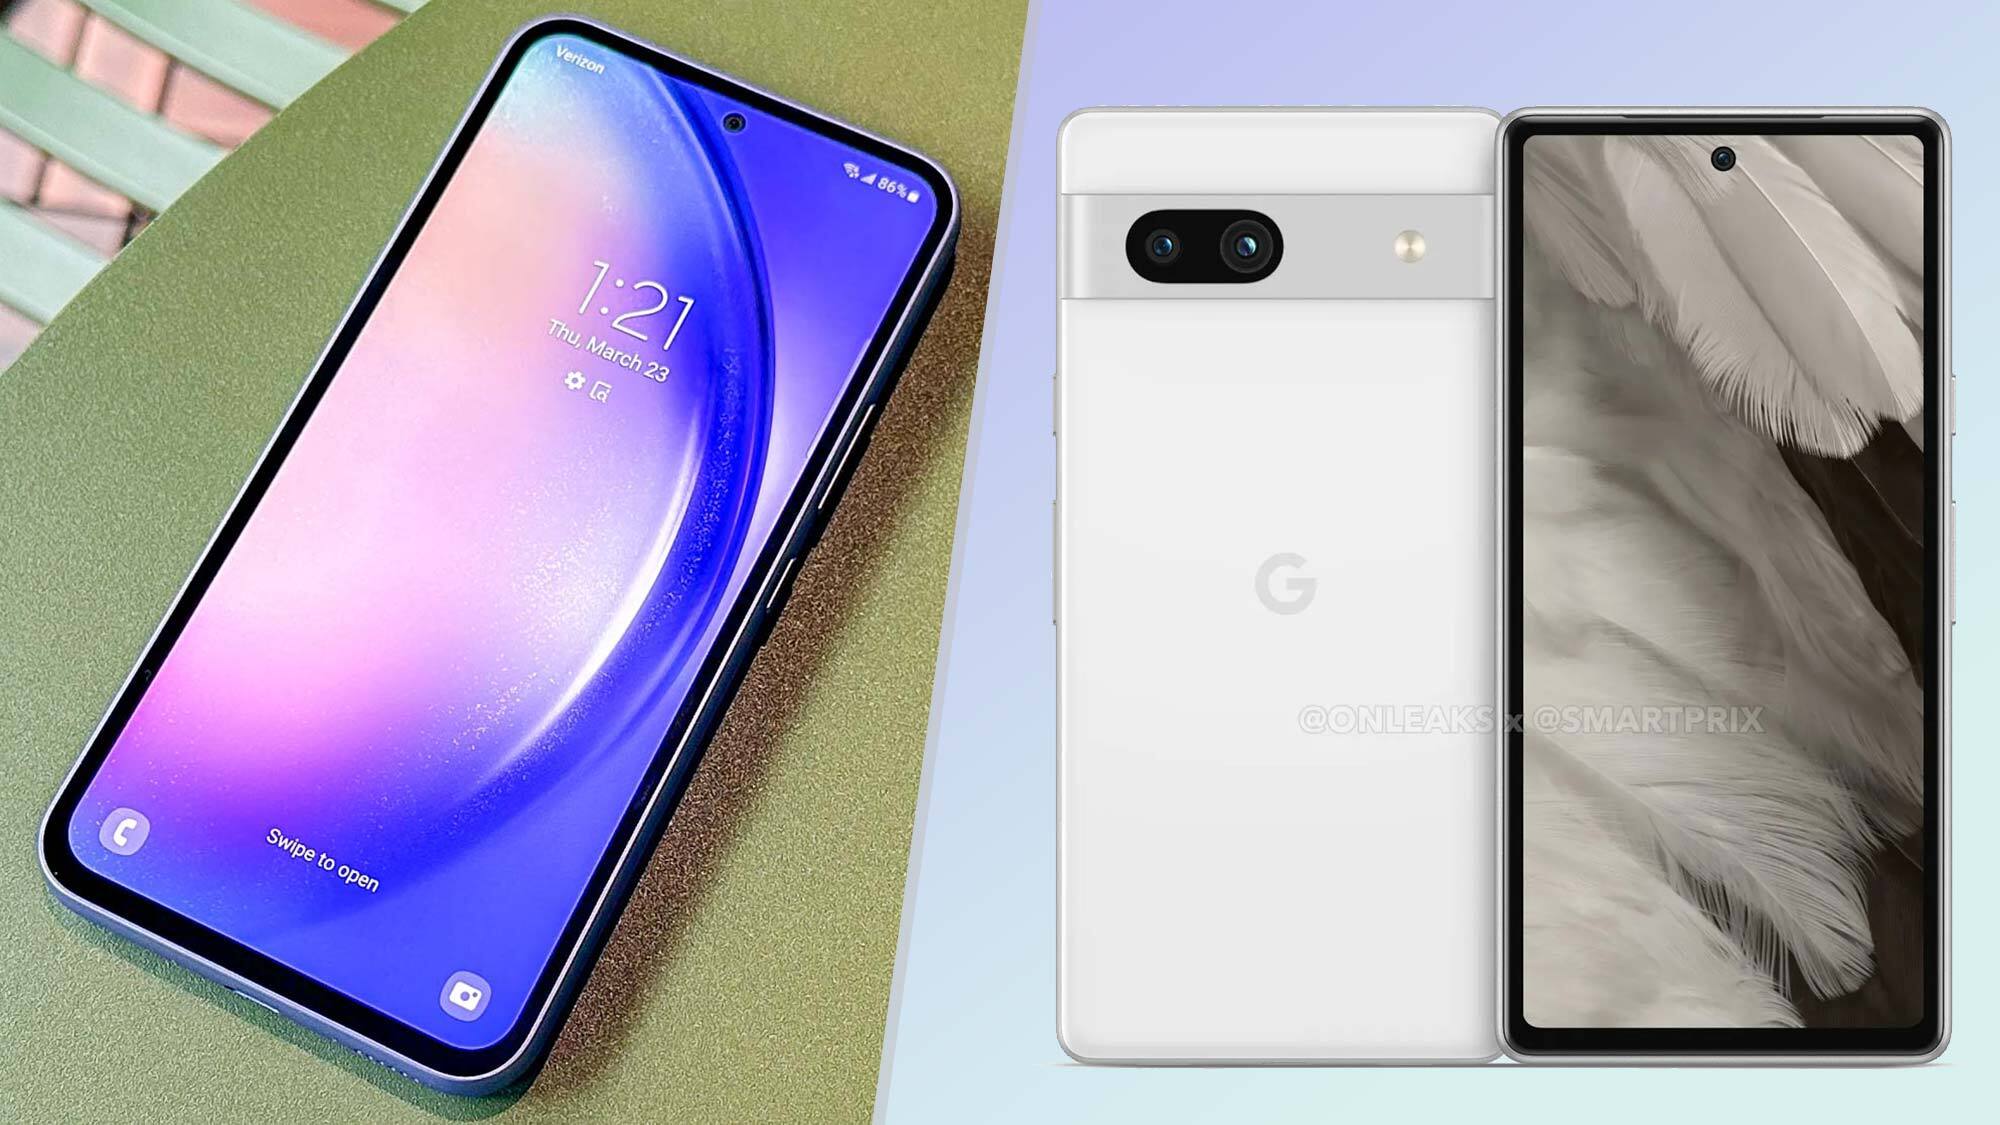 Samsung Galaxy A54 VS Google Pixel 7a - Which Phone Should